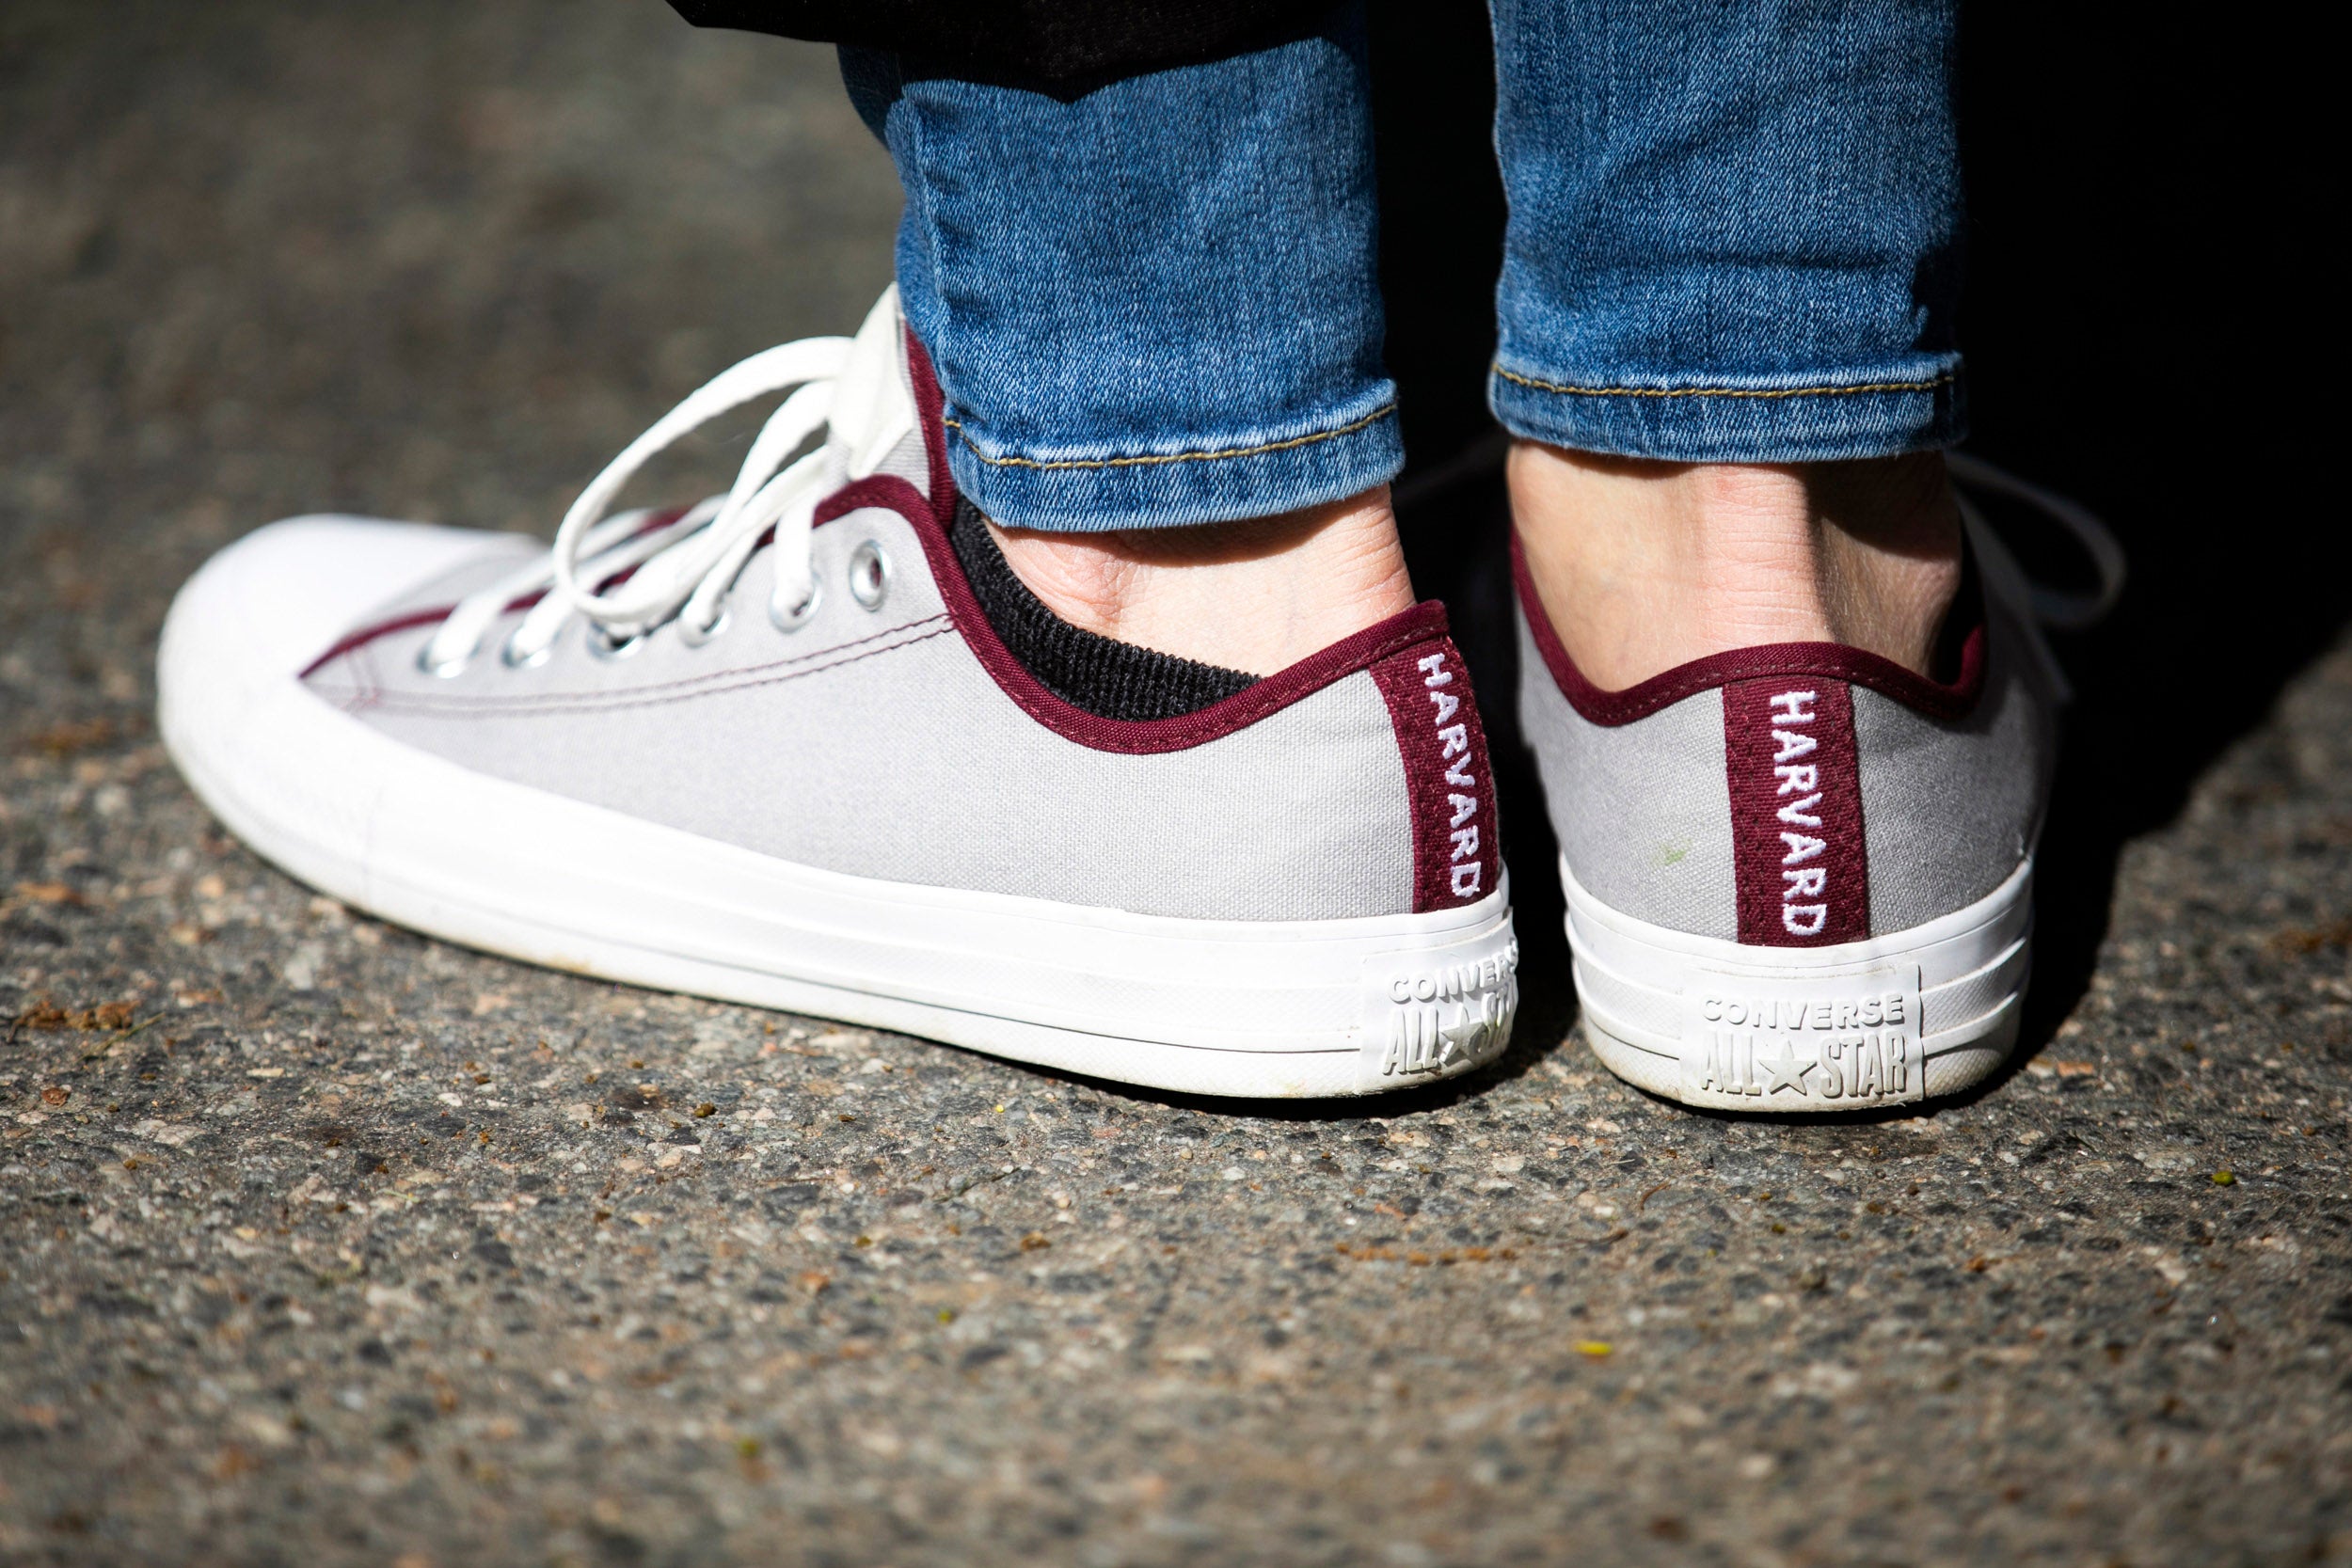 Converse sneakers that read Harvard along the back.